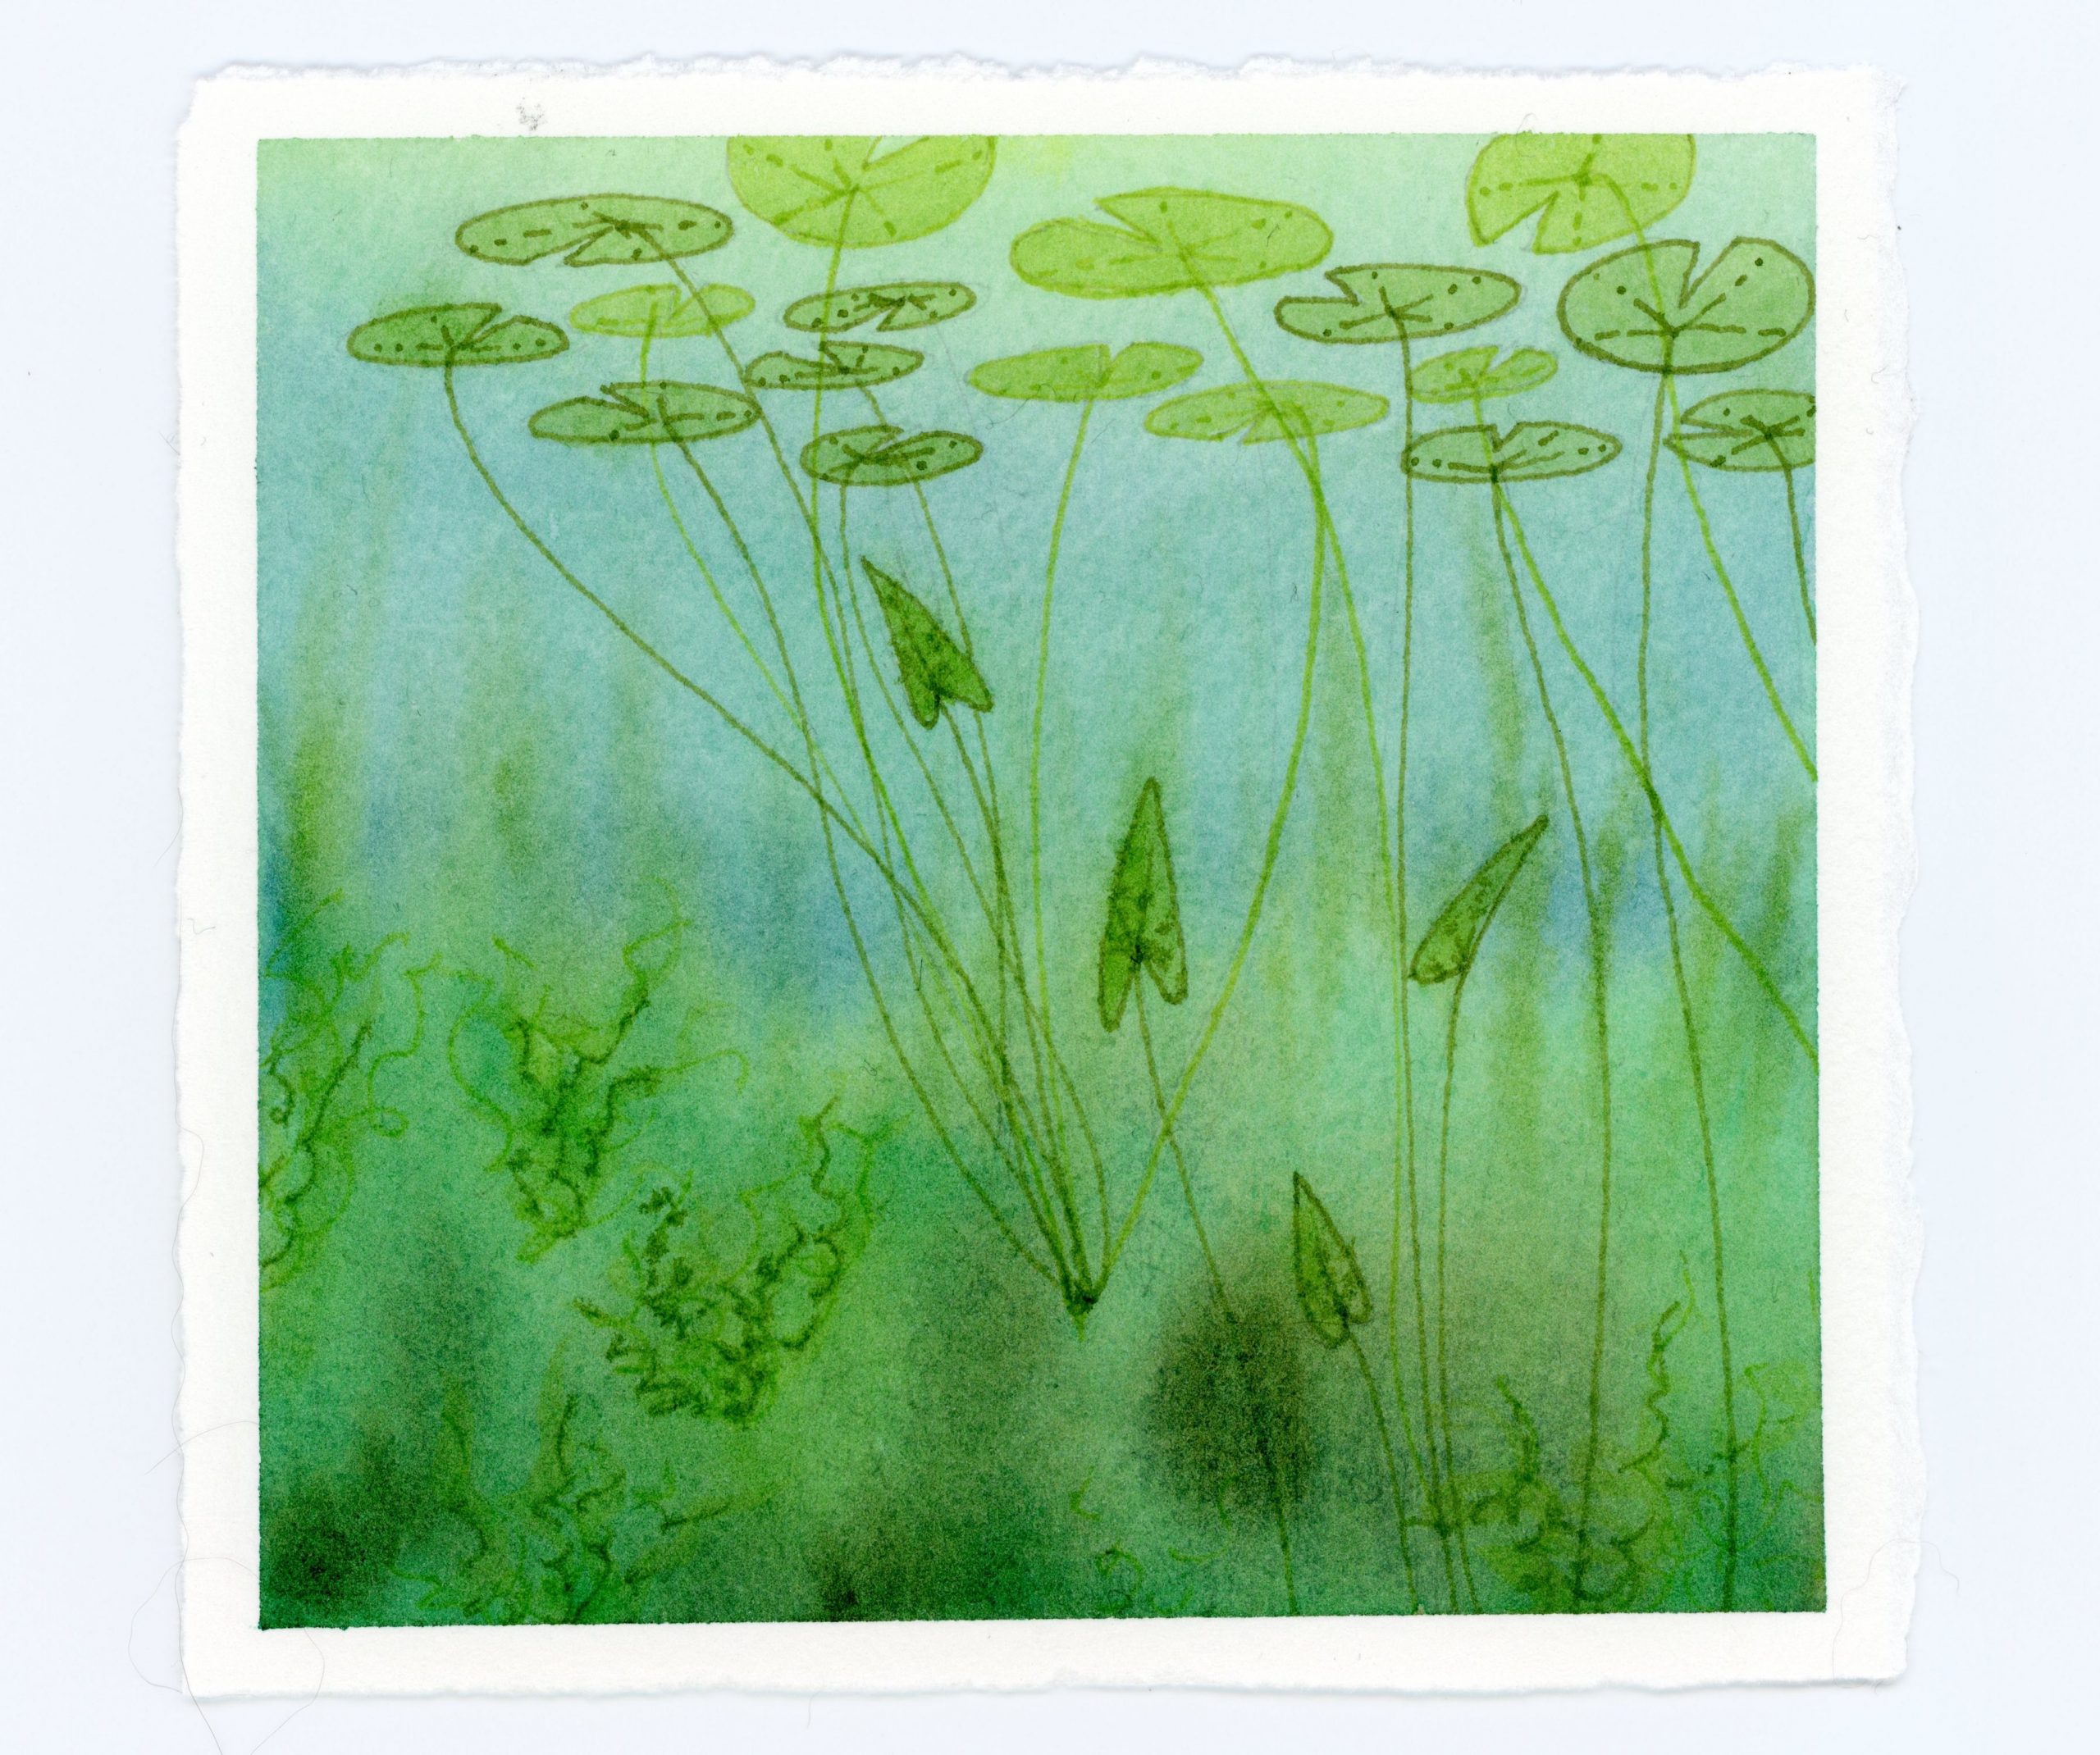 underwater lily pad watercolor and ink illustration